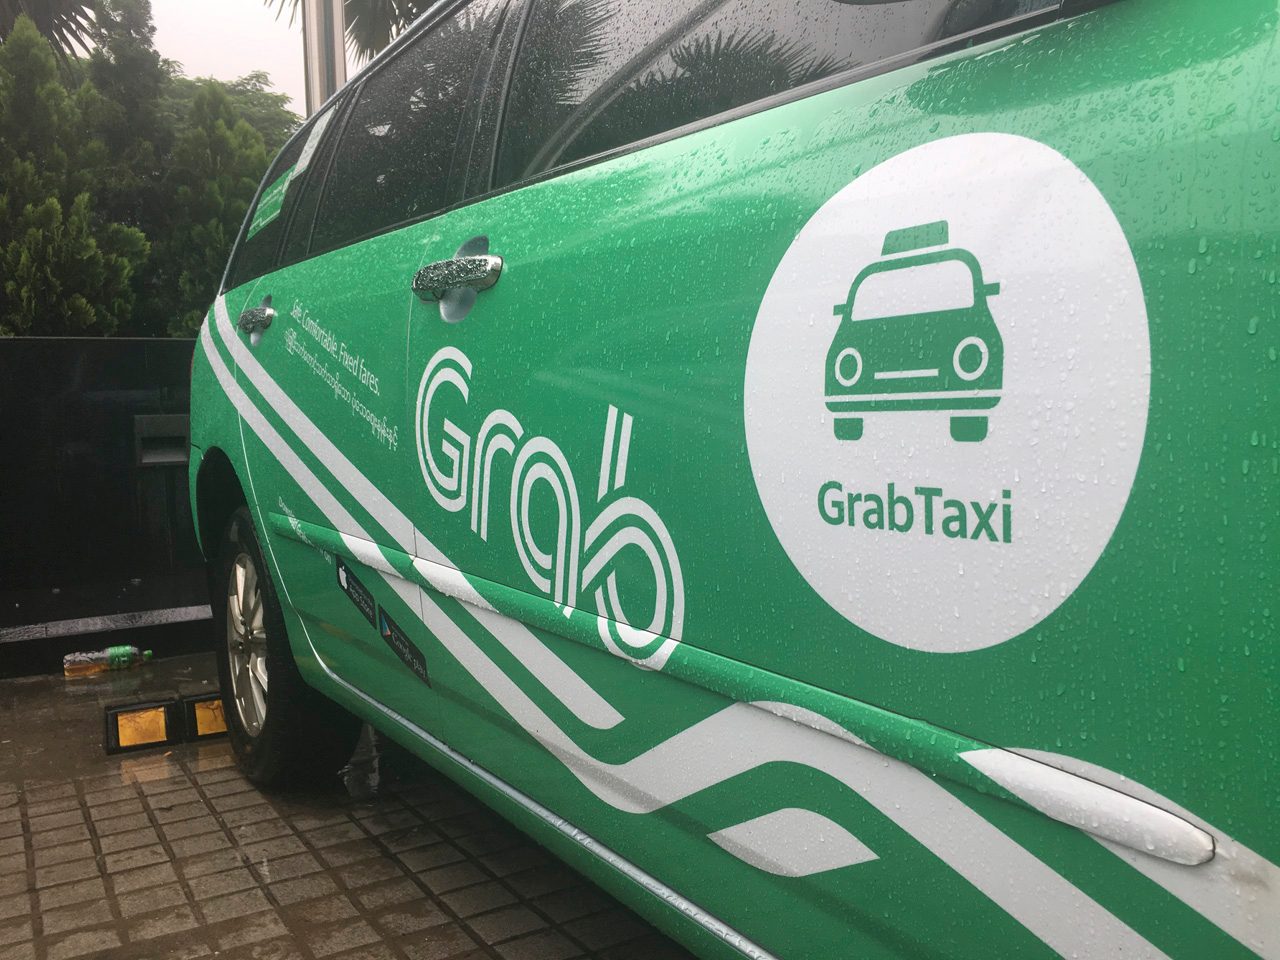 Grab rolls out new tech features to capture market share in Myanmar